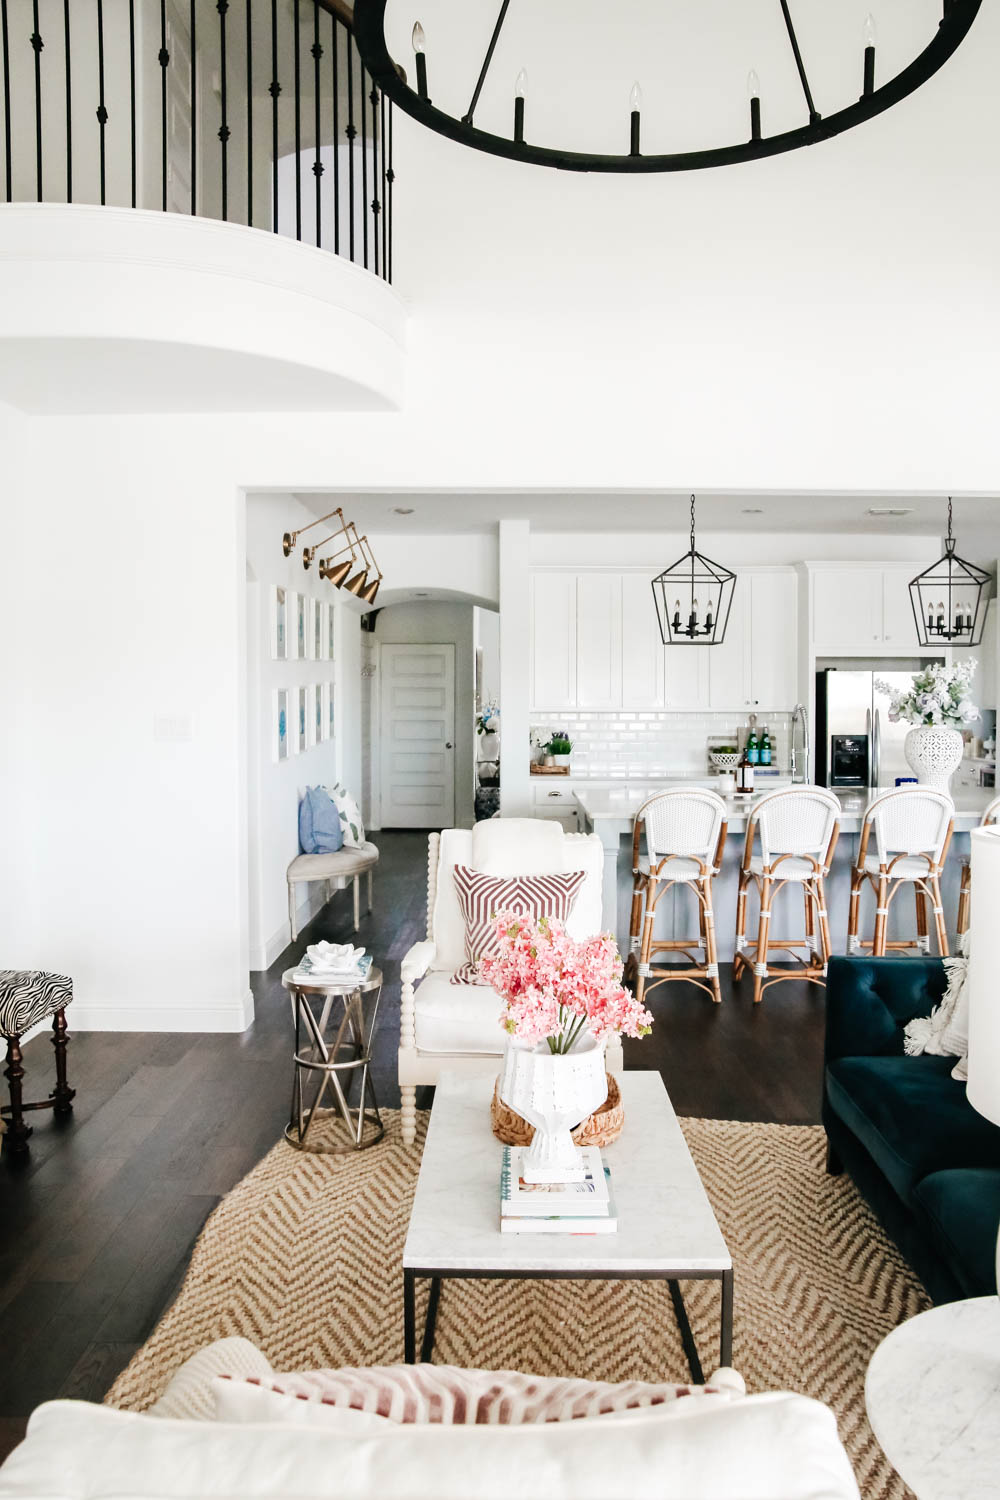 Living room inspiration. White paint, coastal style, transitional style, home tour, design tips for a living room. #livingroominspo #livingroom #hometour #ABlissfulNest